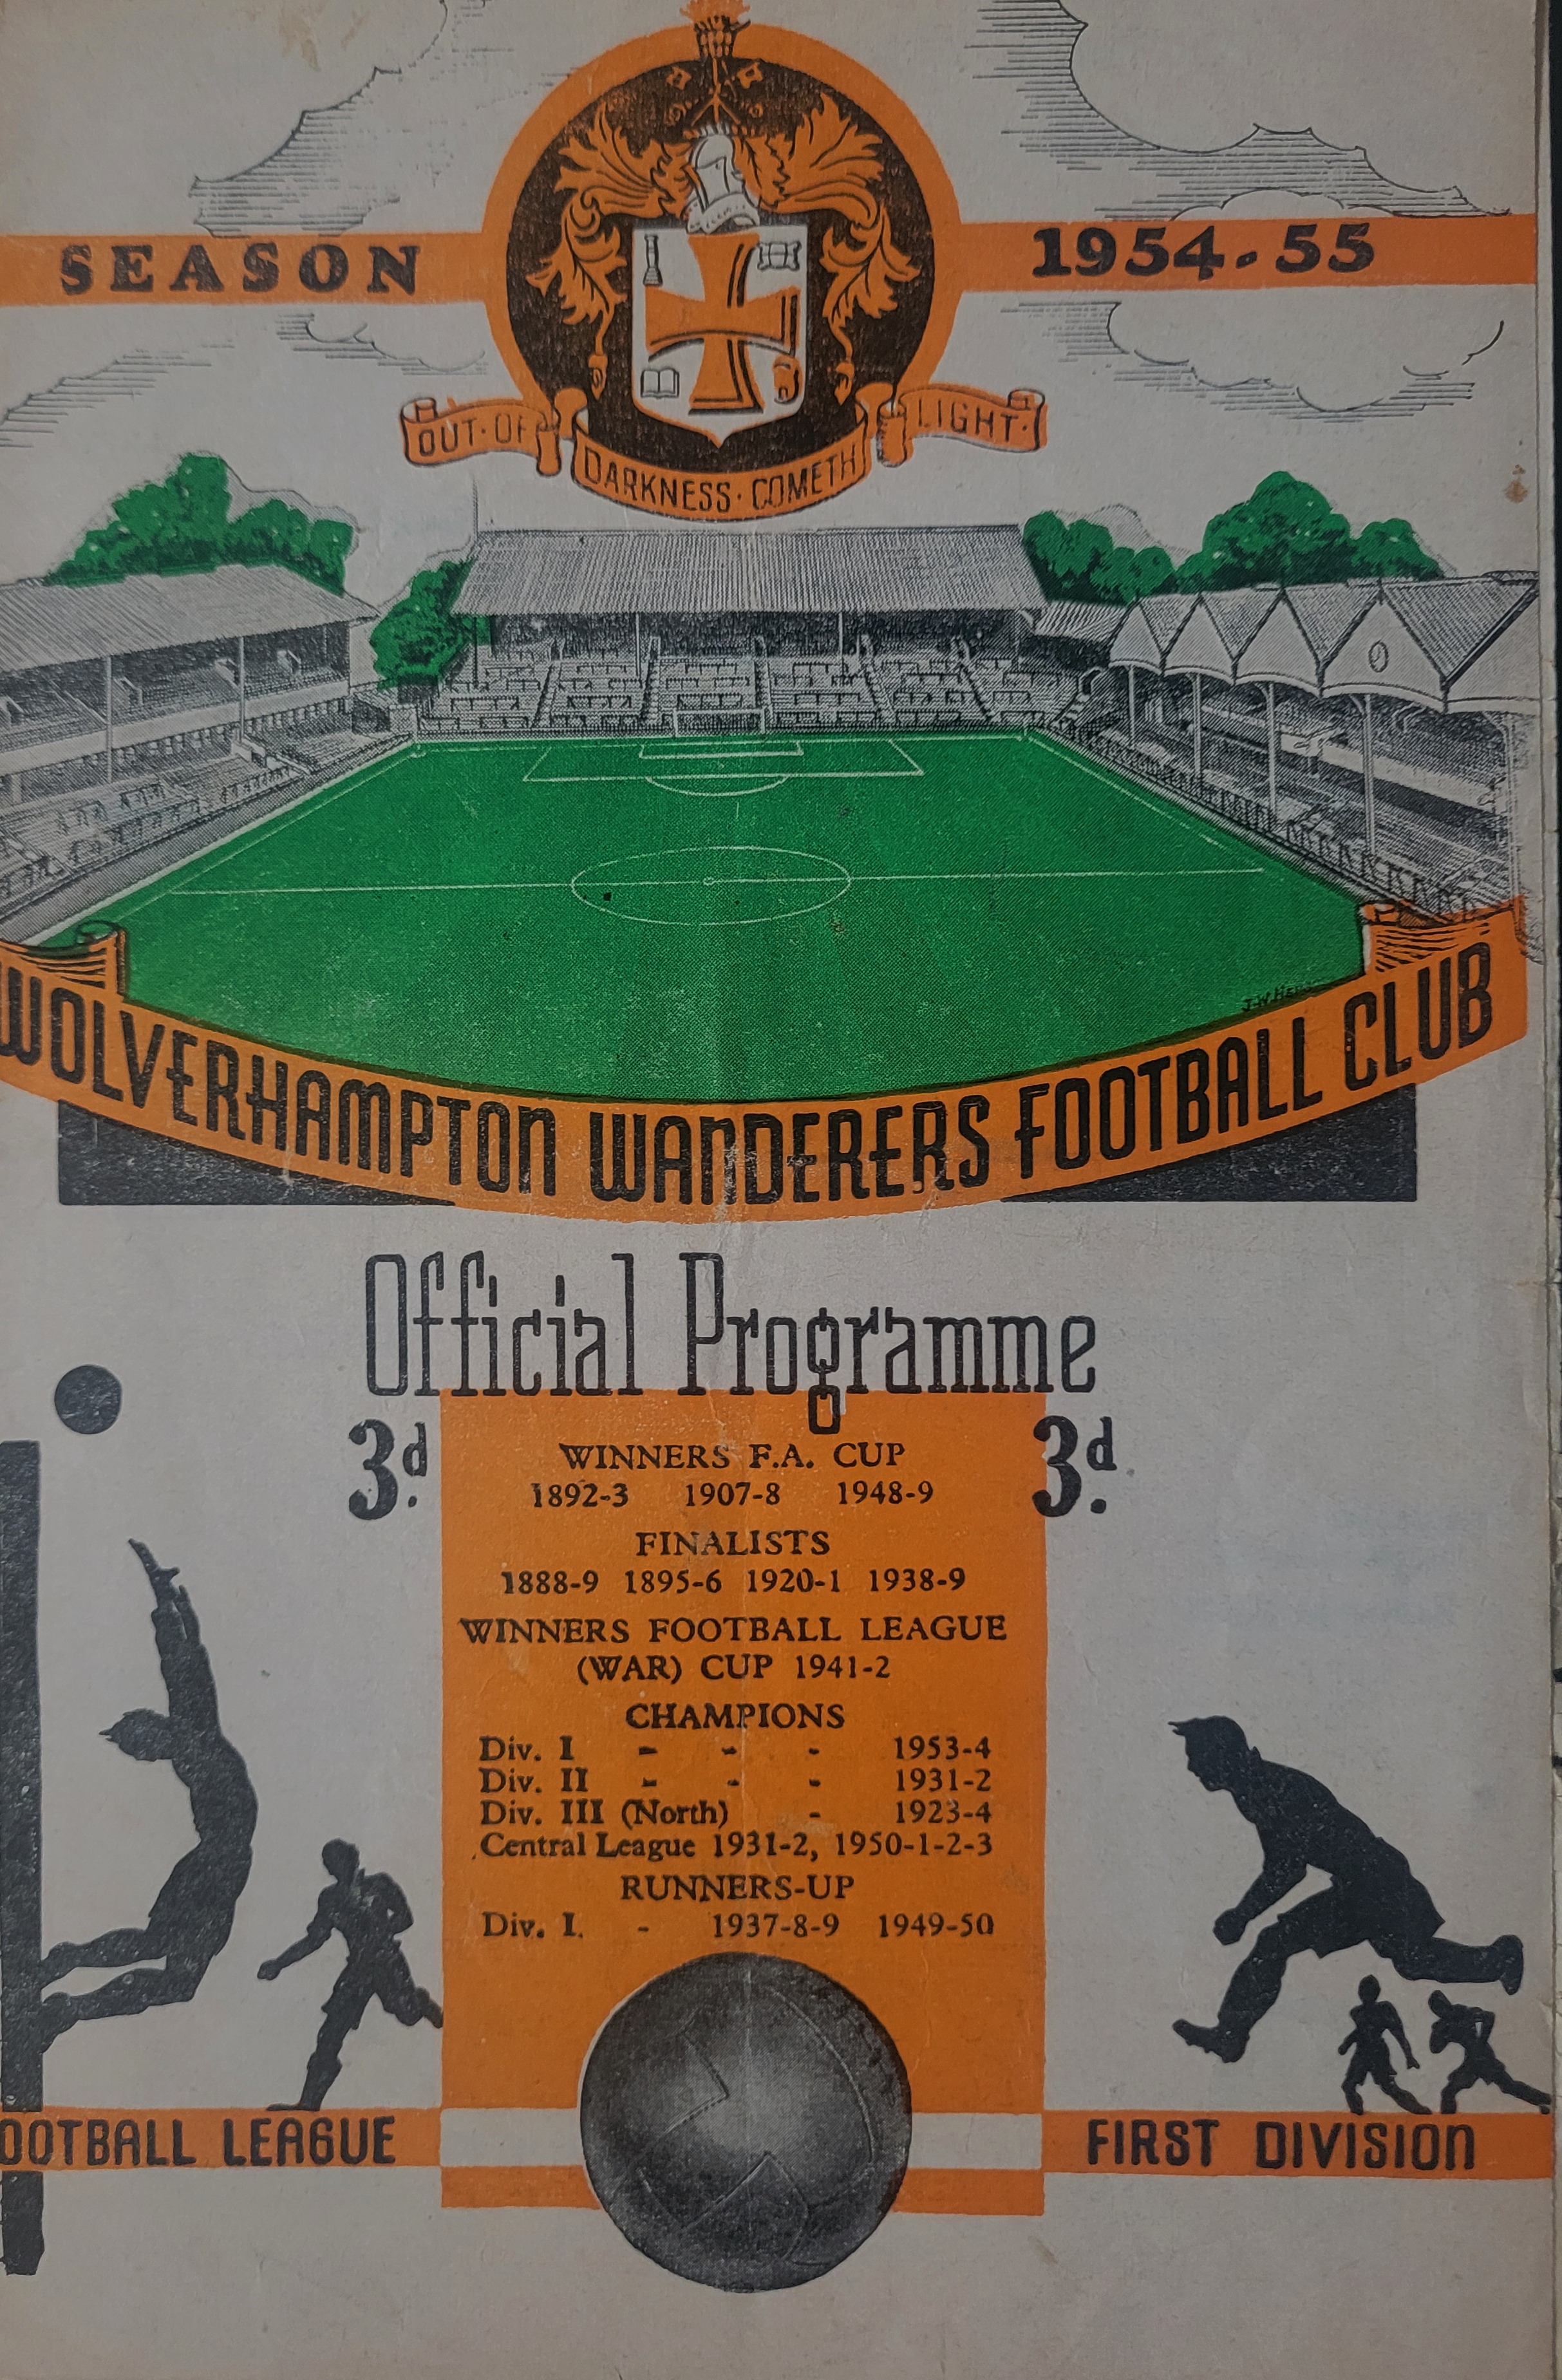 1954-55 WOLVERHAMPTON WANDERERS V WEST BROMWICH ALBION CHARITY SHIELD